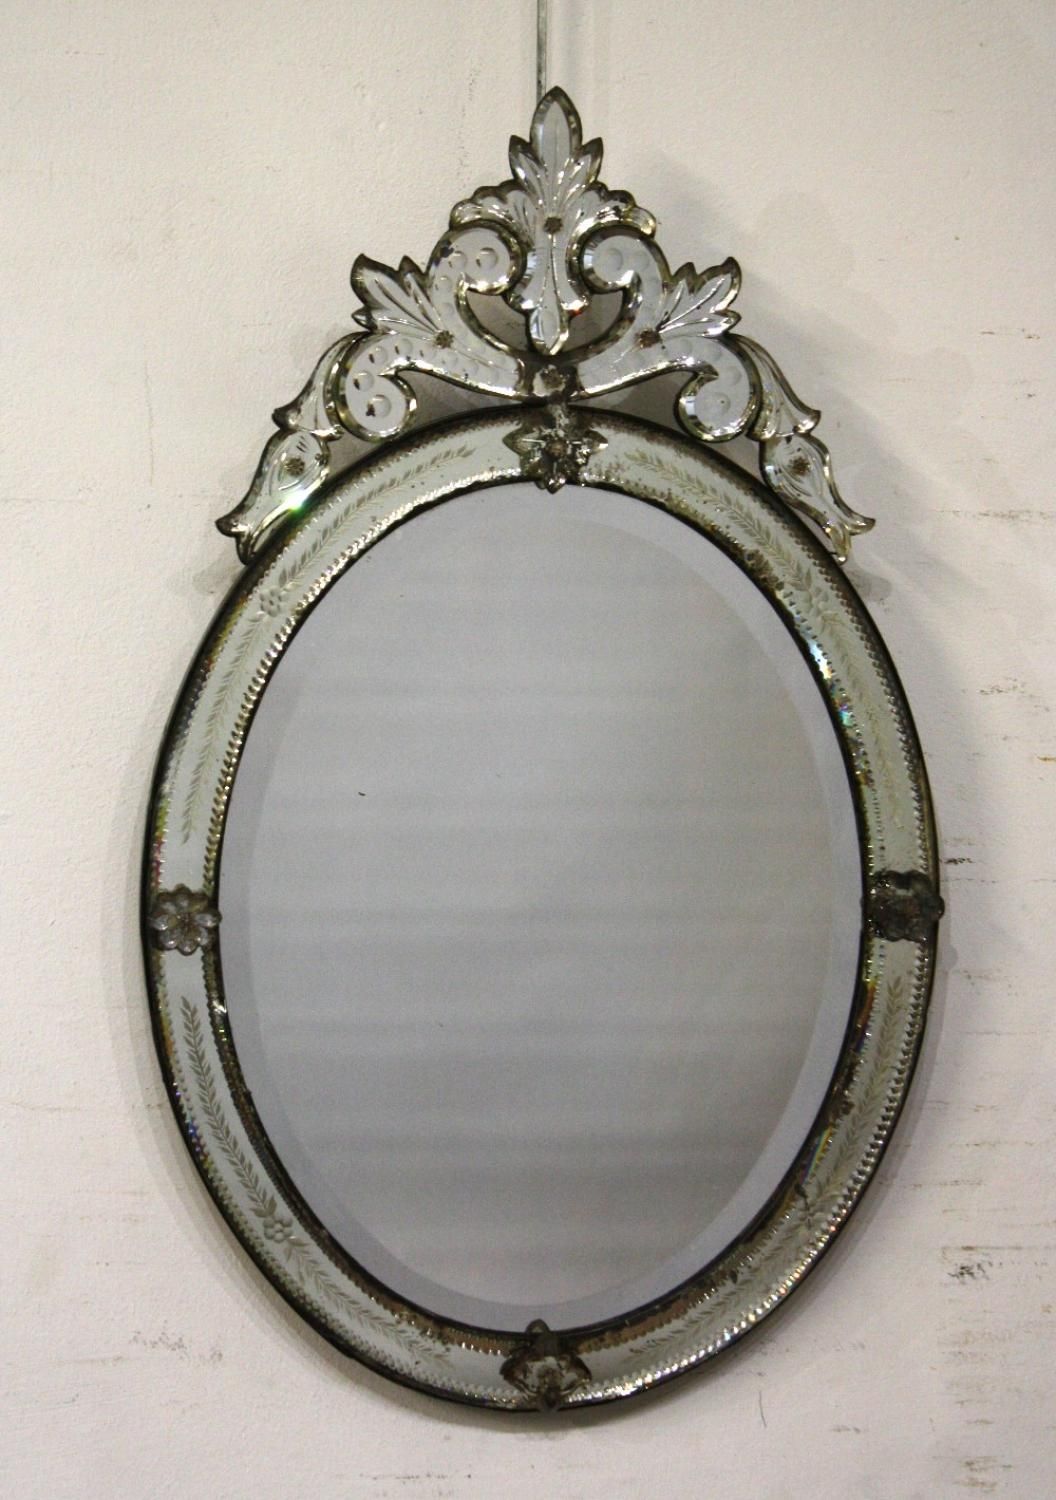 Small Oval Venetian Mirror Intended For Venetian Oval Mirror (View 6 of 20)